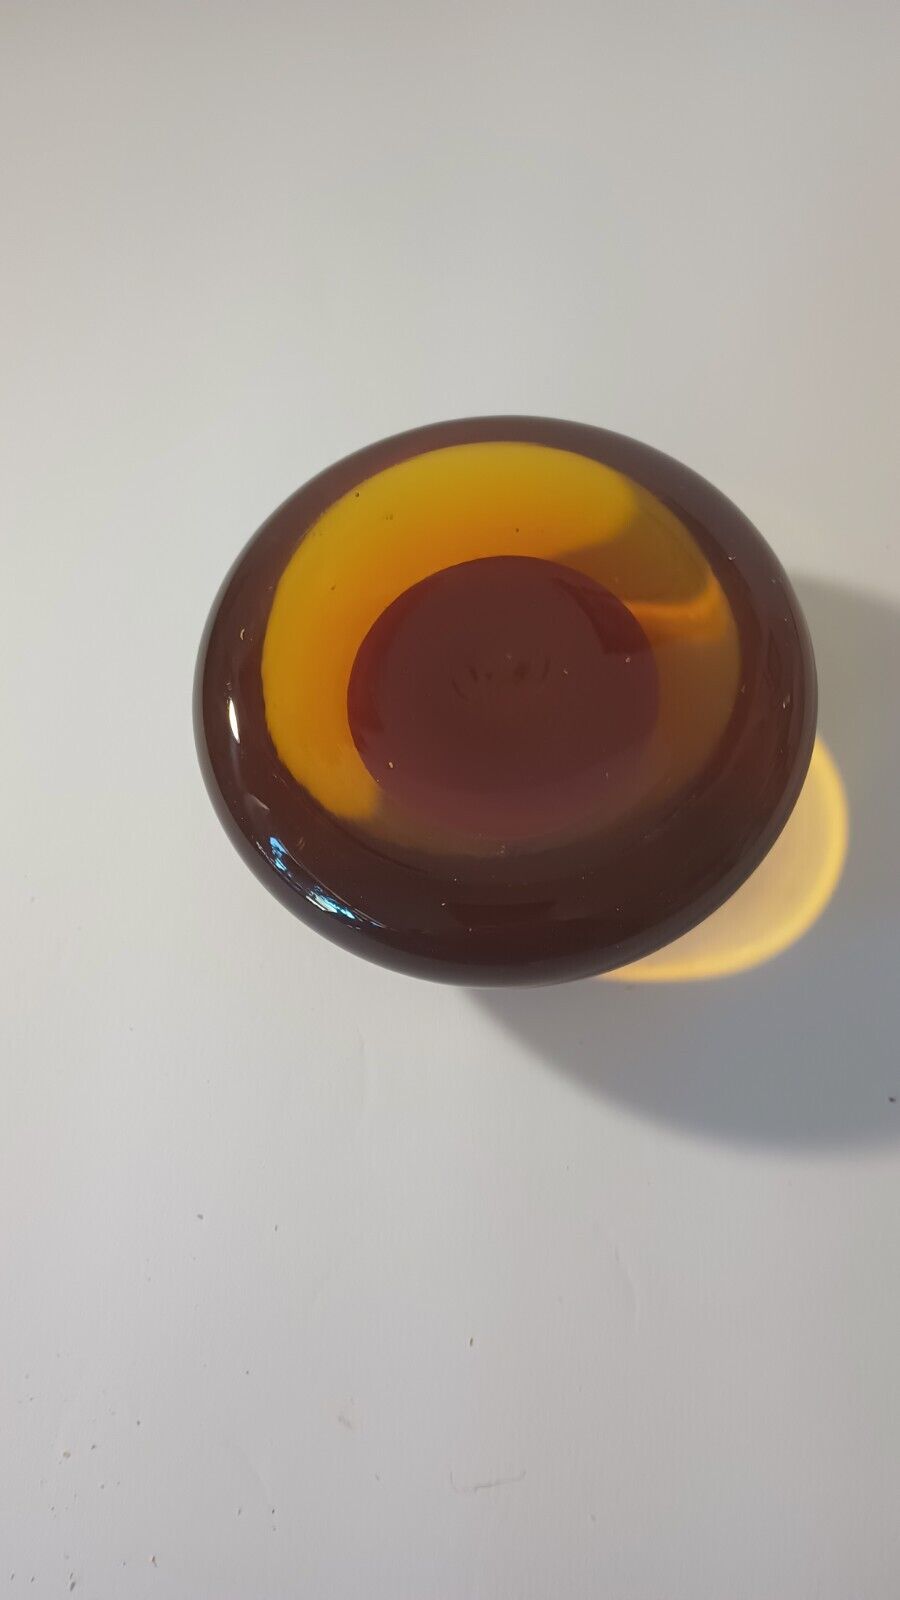 Homemade Heavy Amber Paperweight Looks Like The Moon Inside